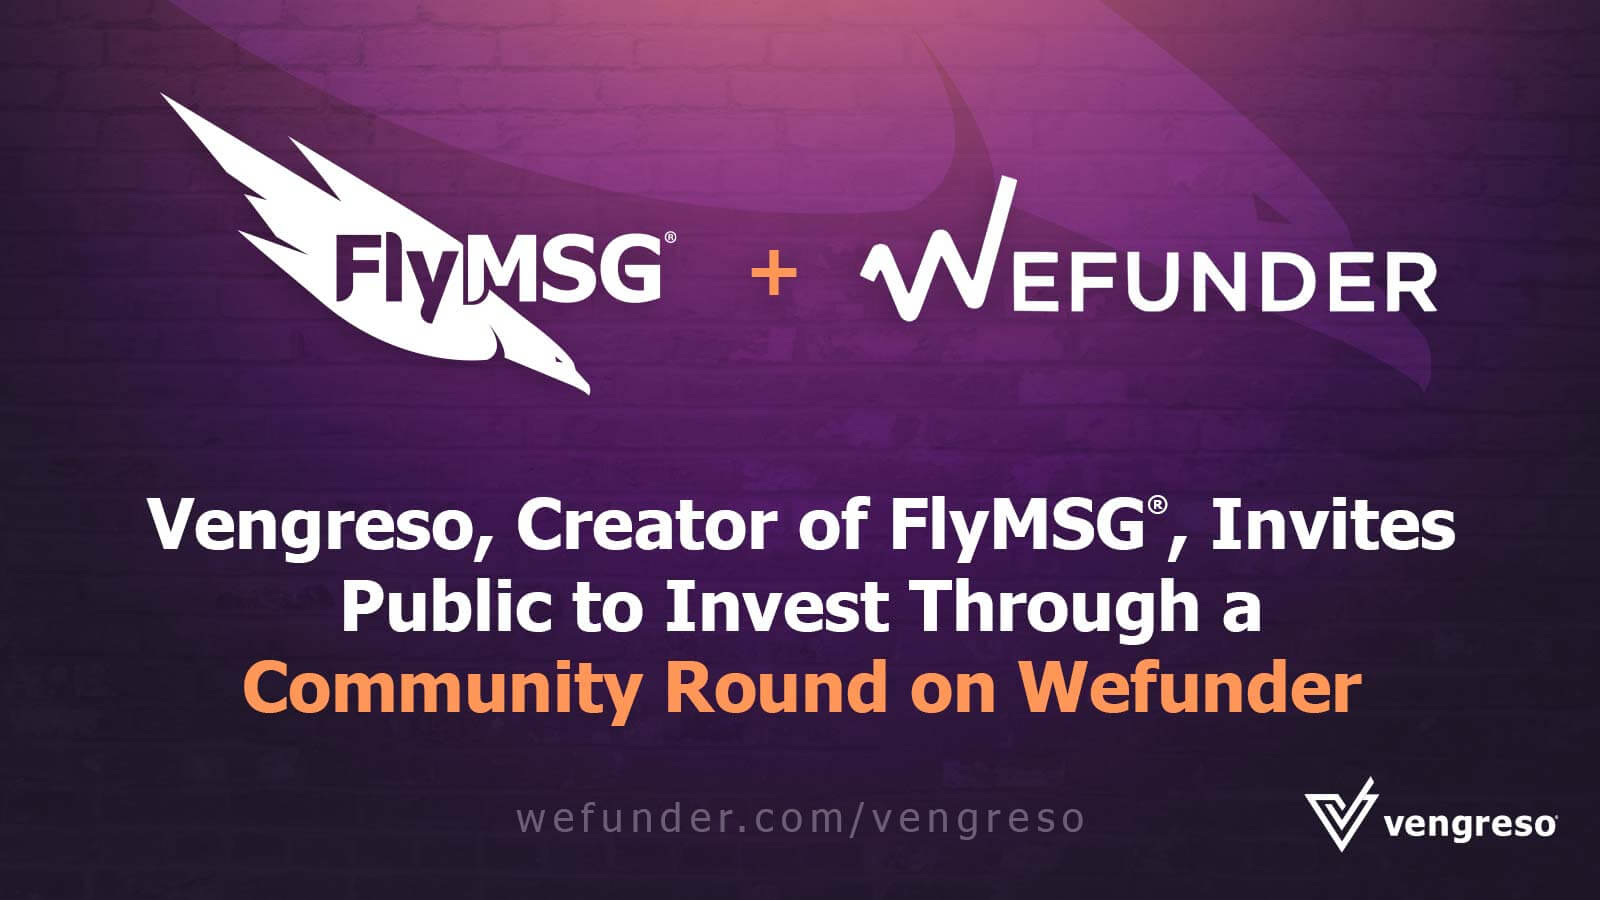 Vengreso, a minority-owned business and creator of FlyMSG®, expands with a community round on Wefunder.